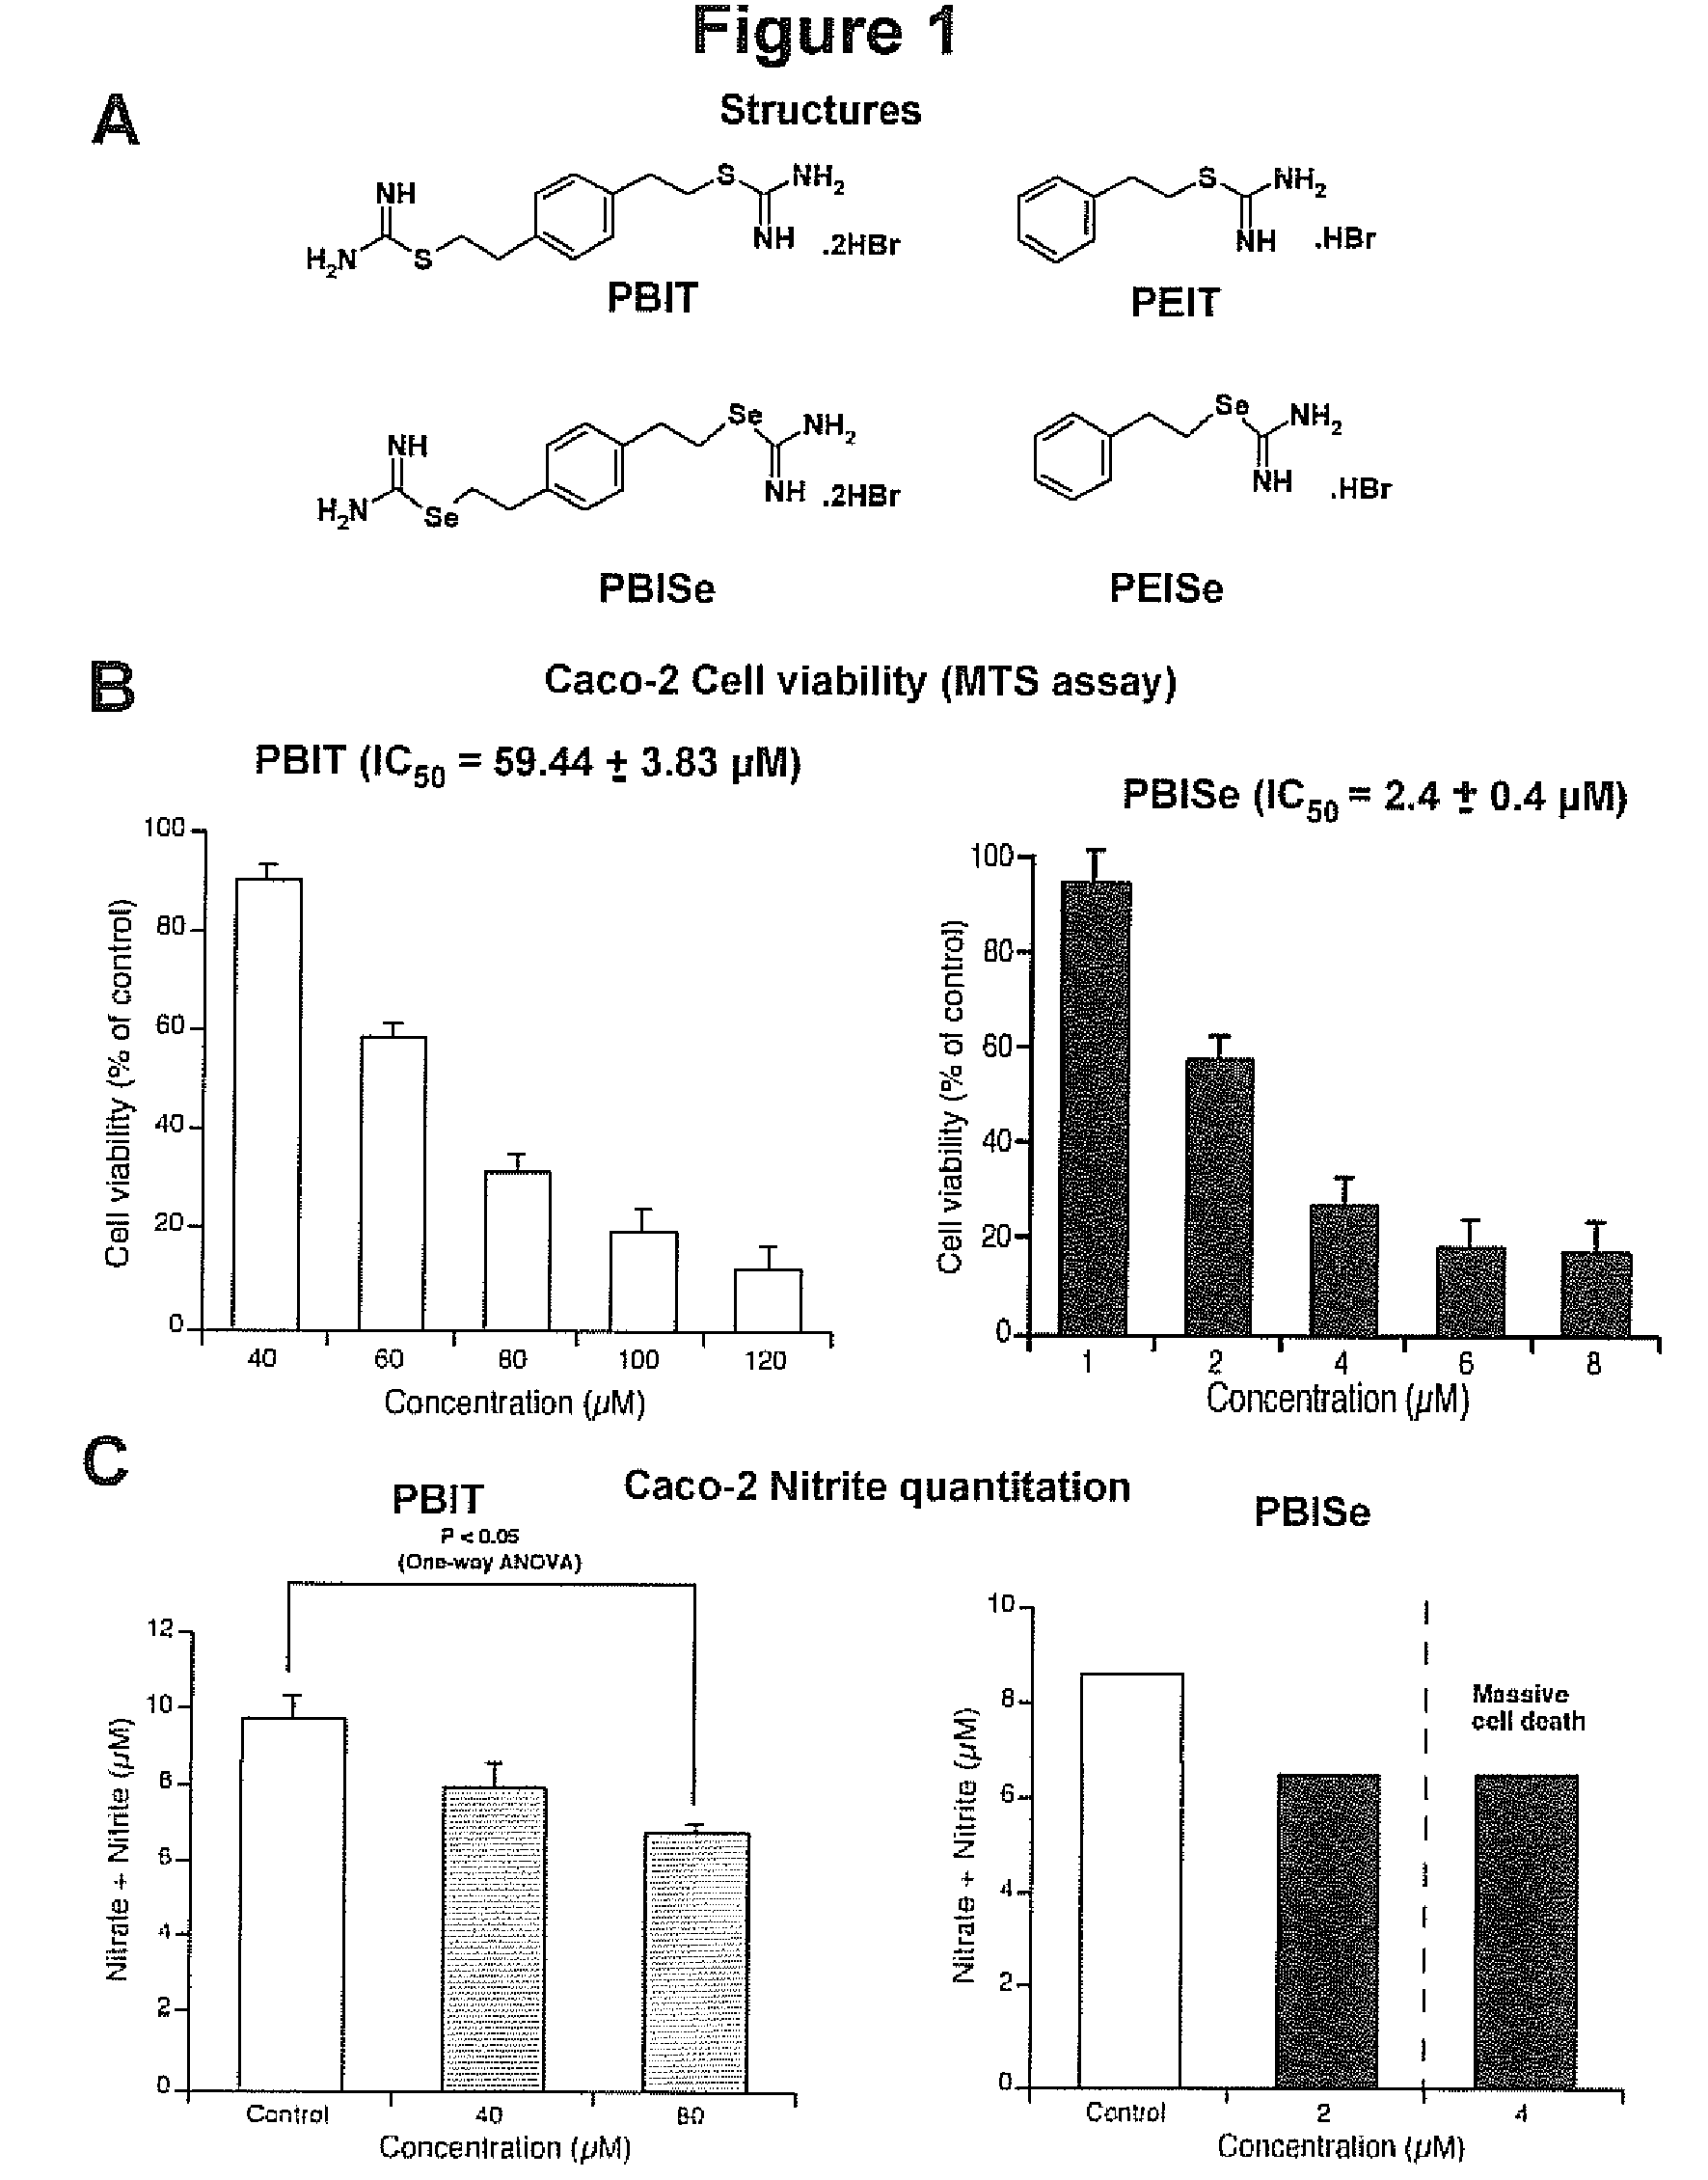 Anti-cancer compositions and methods